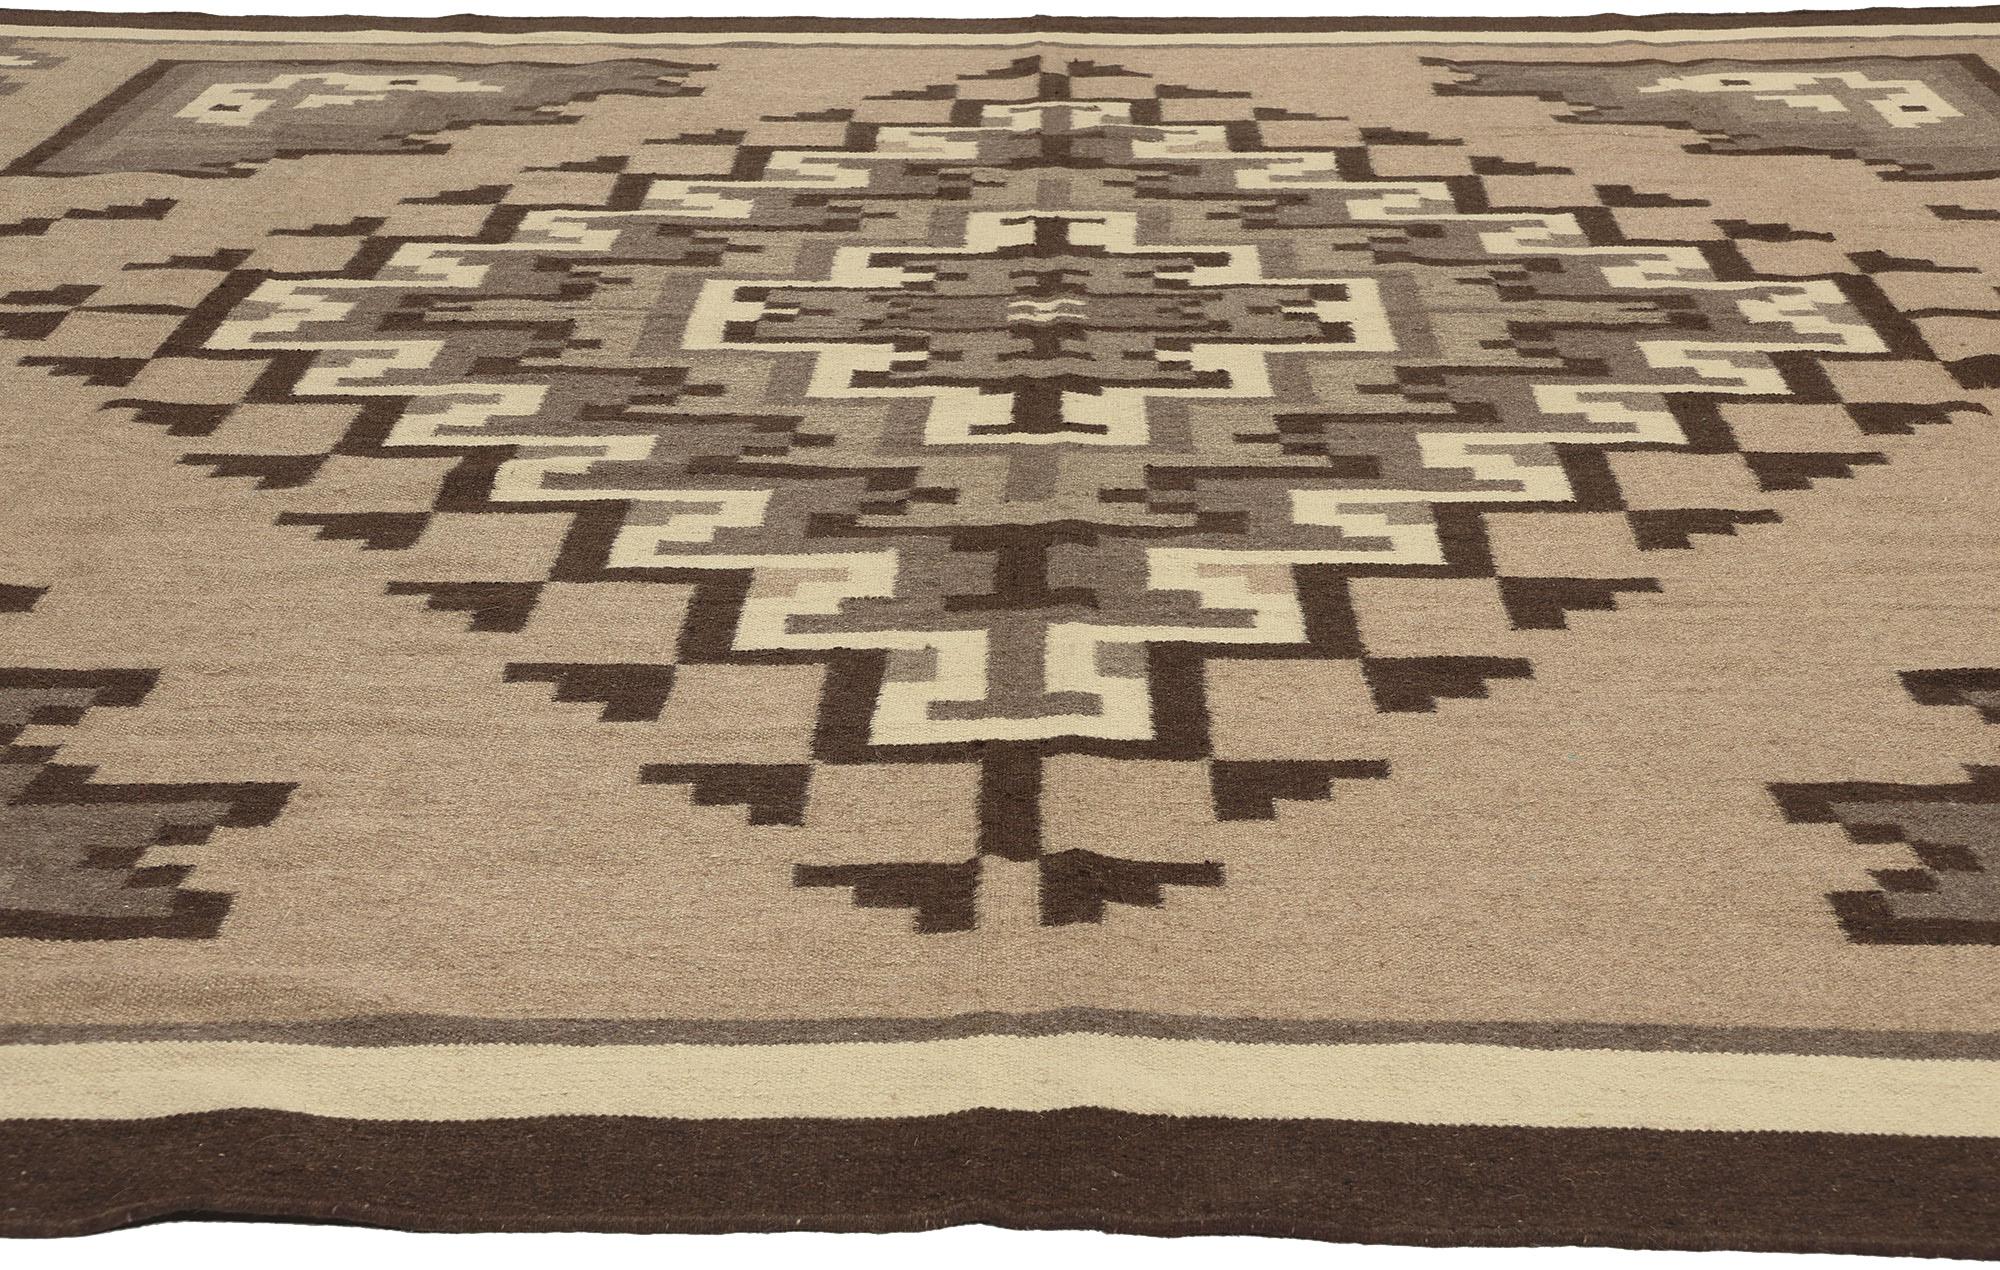 South Asian Contemporary Santa Fe Southwest Modern Two Grey Hills Navajo-Style Rug  For Sale